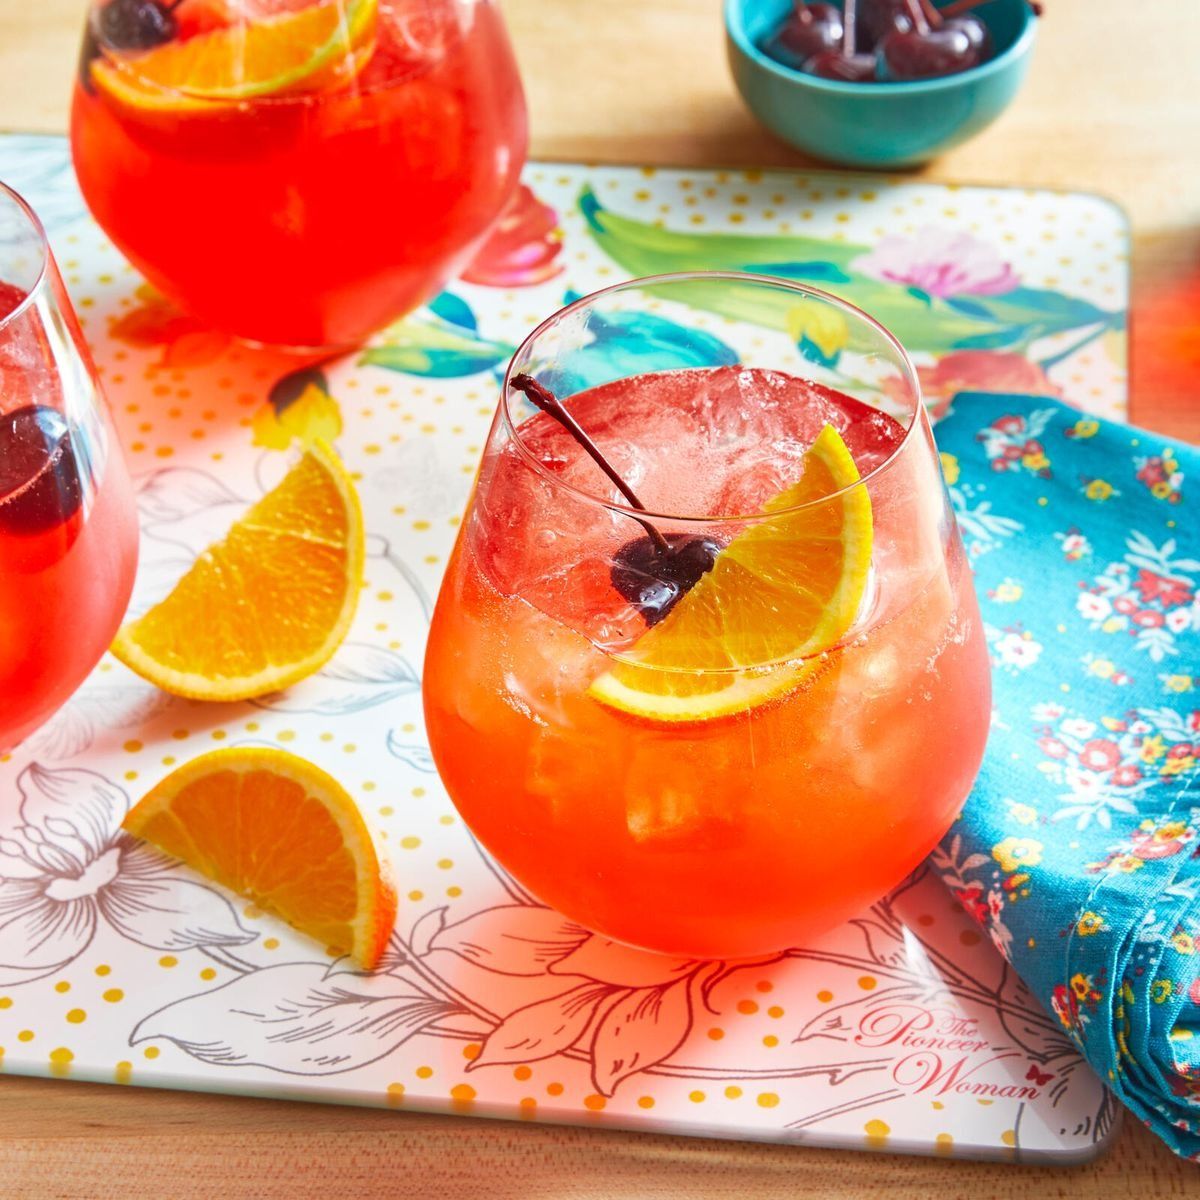 How to Style a 4th of July Beverage Station + 3 Easy Summer Drink Recipes —  Gathered Living